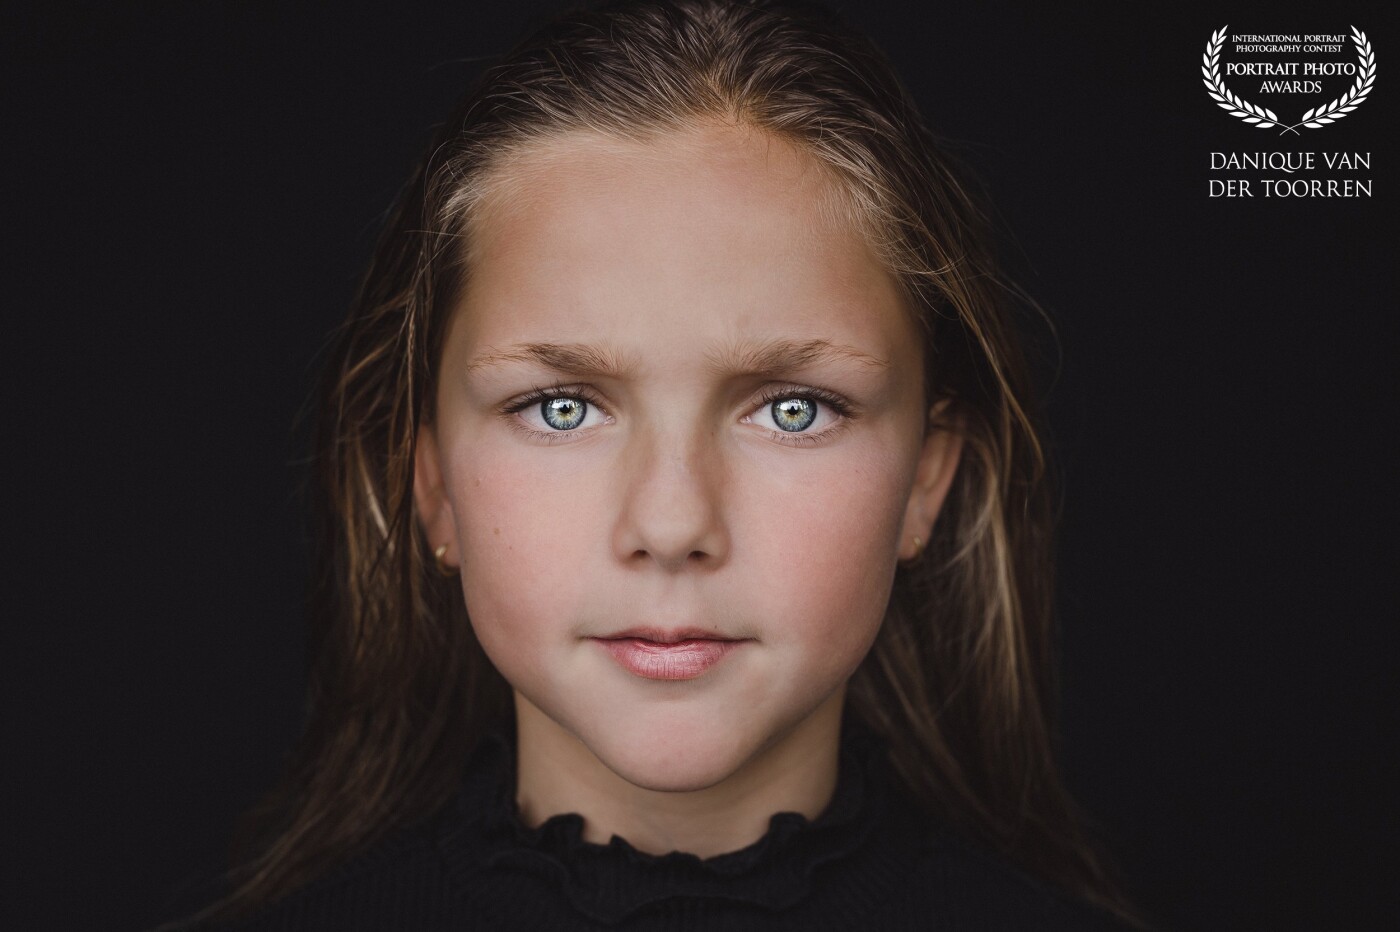 My own model Ravenna, my beautiful 9 year old daughter.<br />
Her face and her eyes show how beautiful she is.<br />
In this photo I used water in the hair<br />
<br />
Model: Ravenna<br />
Photo & Lightroom edit: @daniquevdtphotography